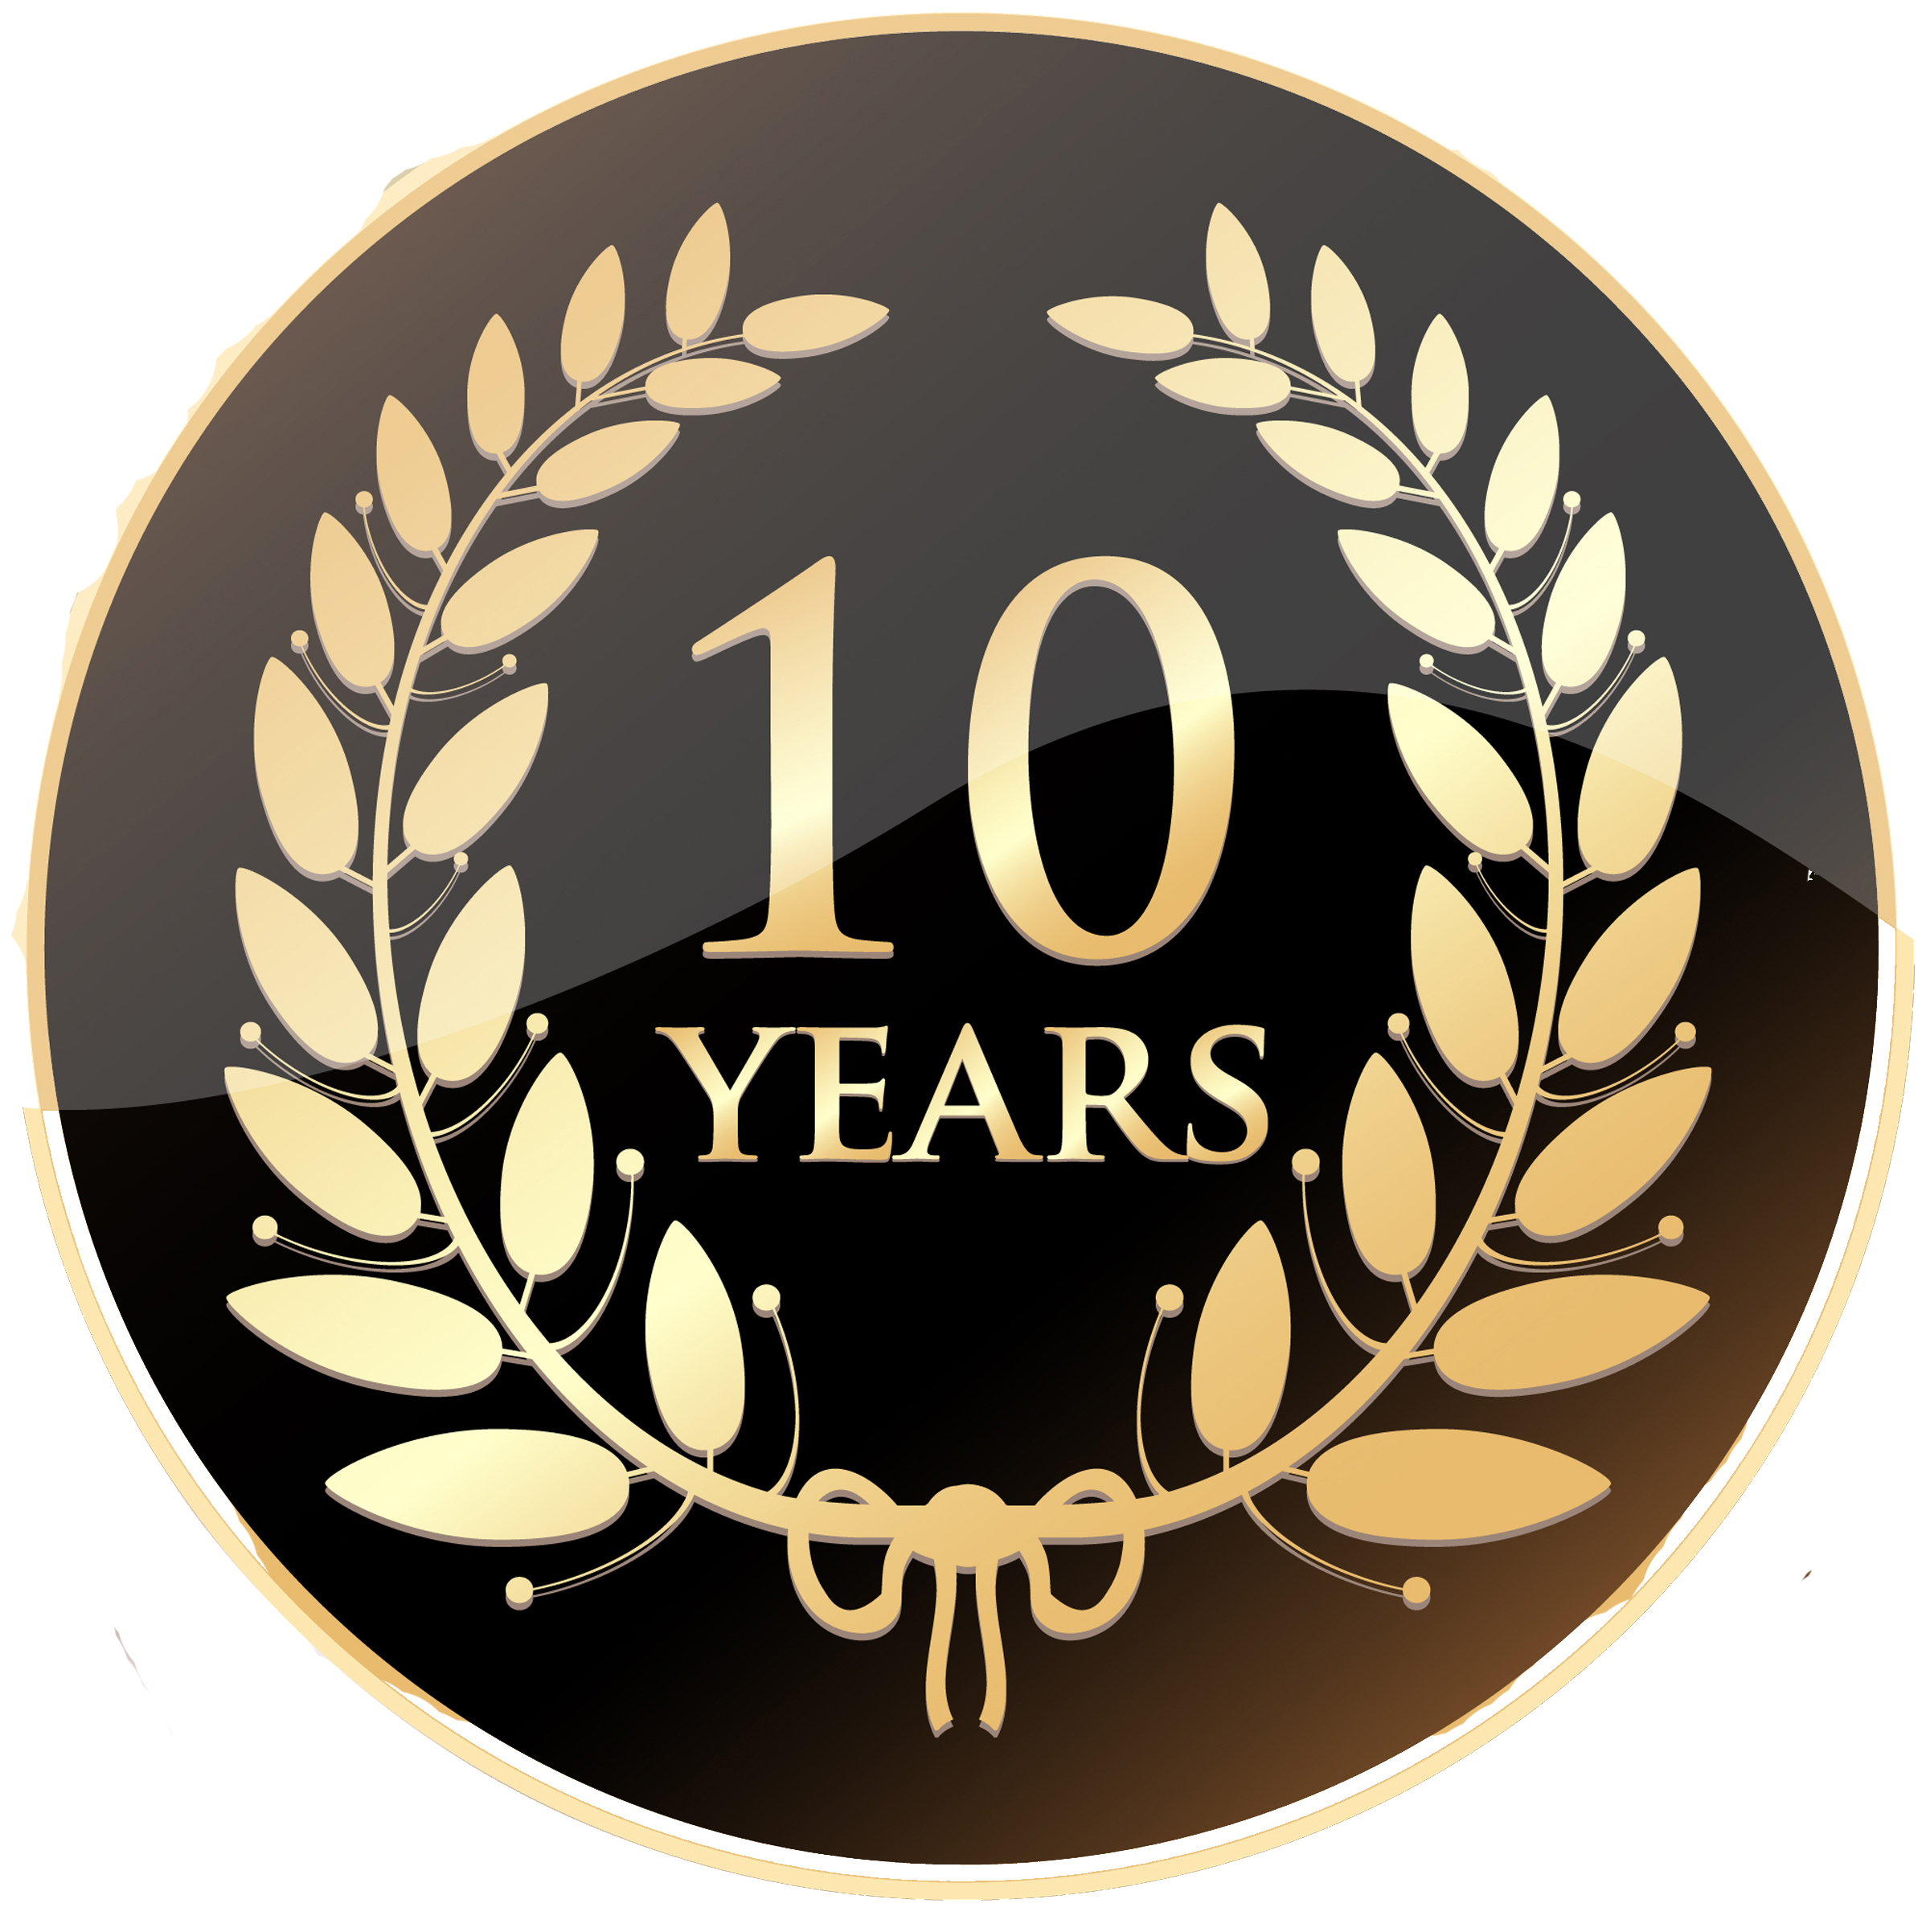 Our 10 Year Business Anniversary TODAY! Simon Coles Fitness Services